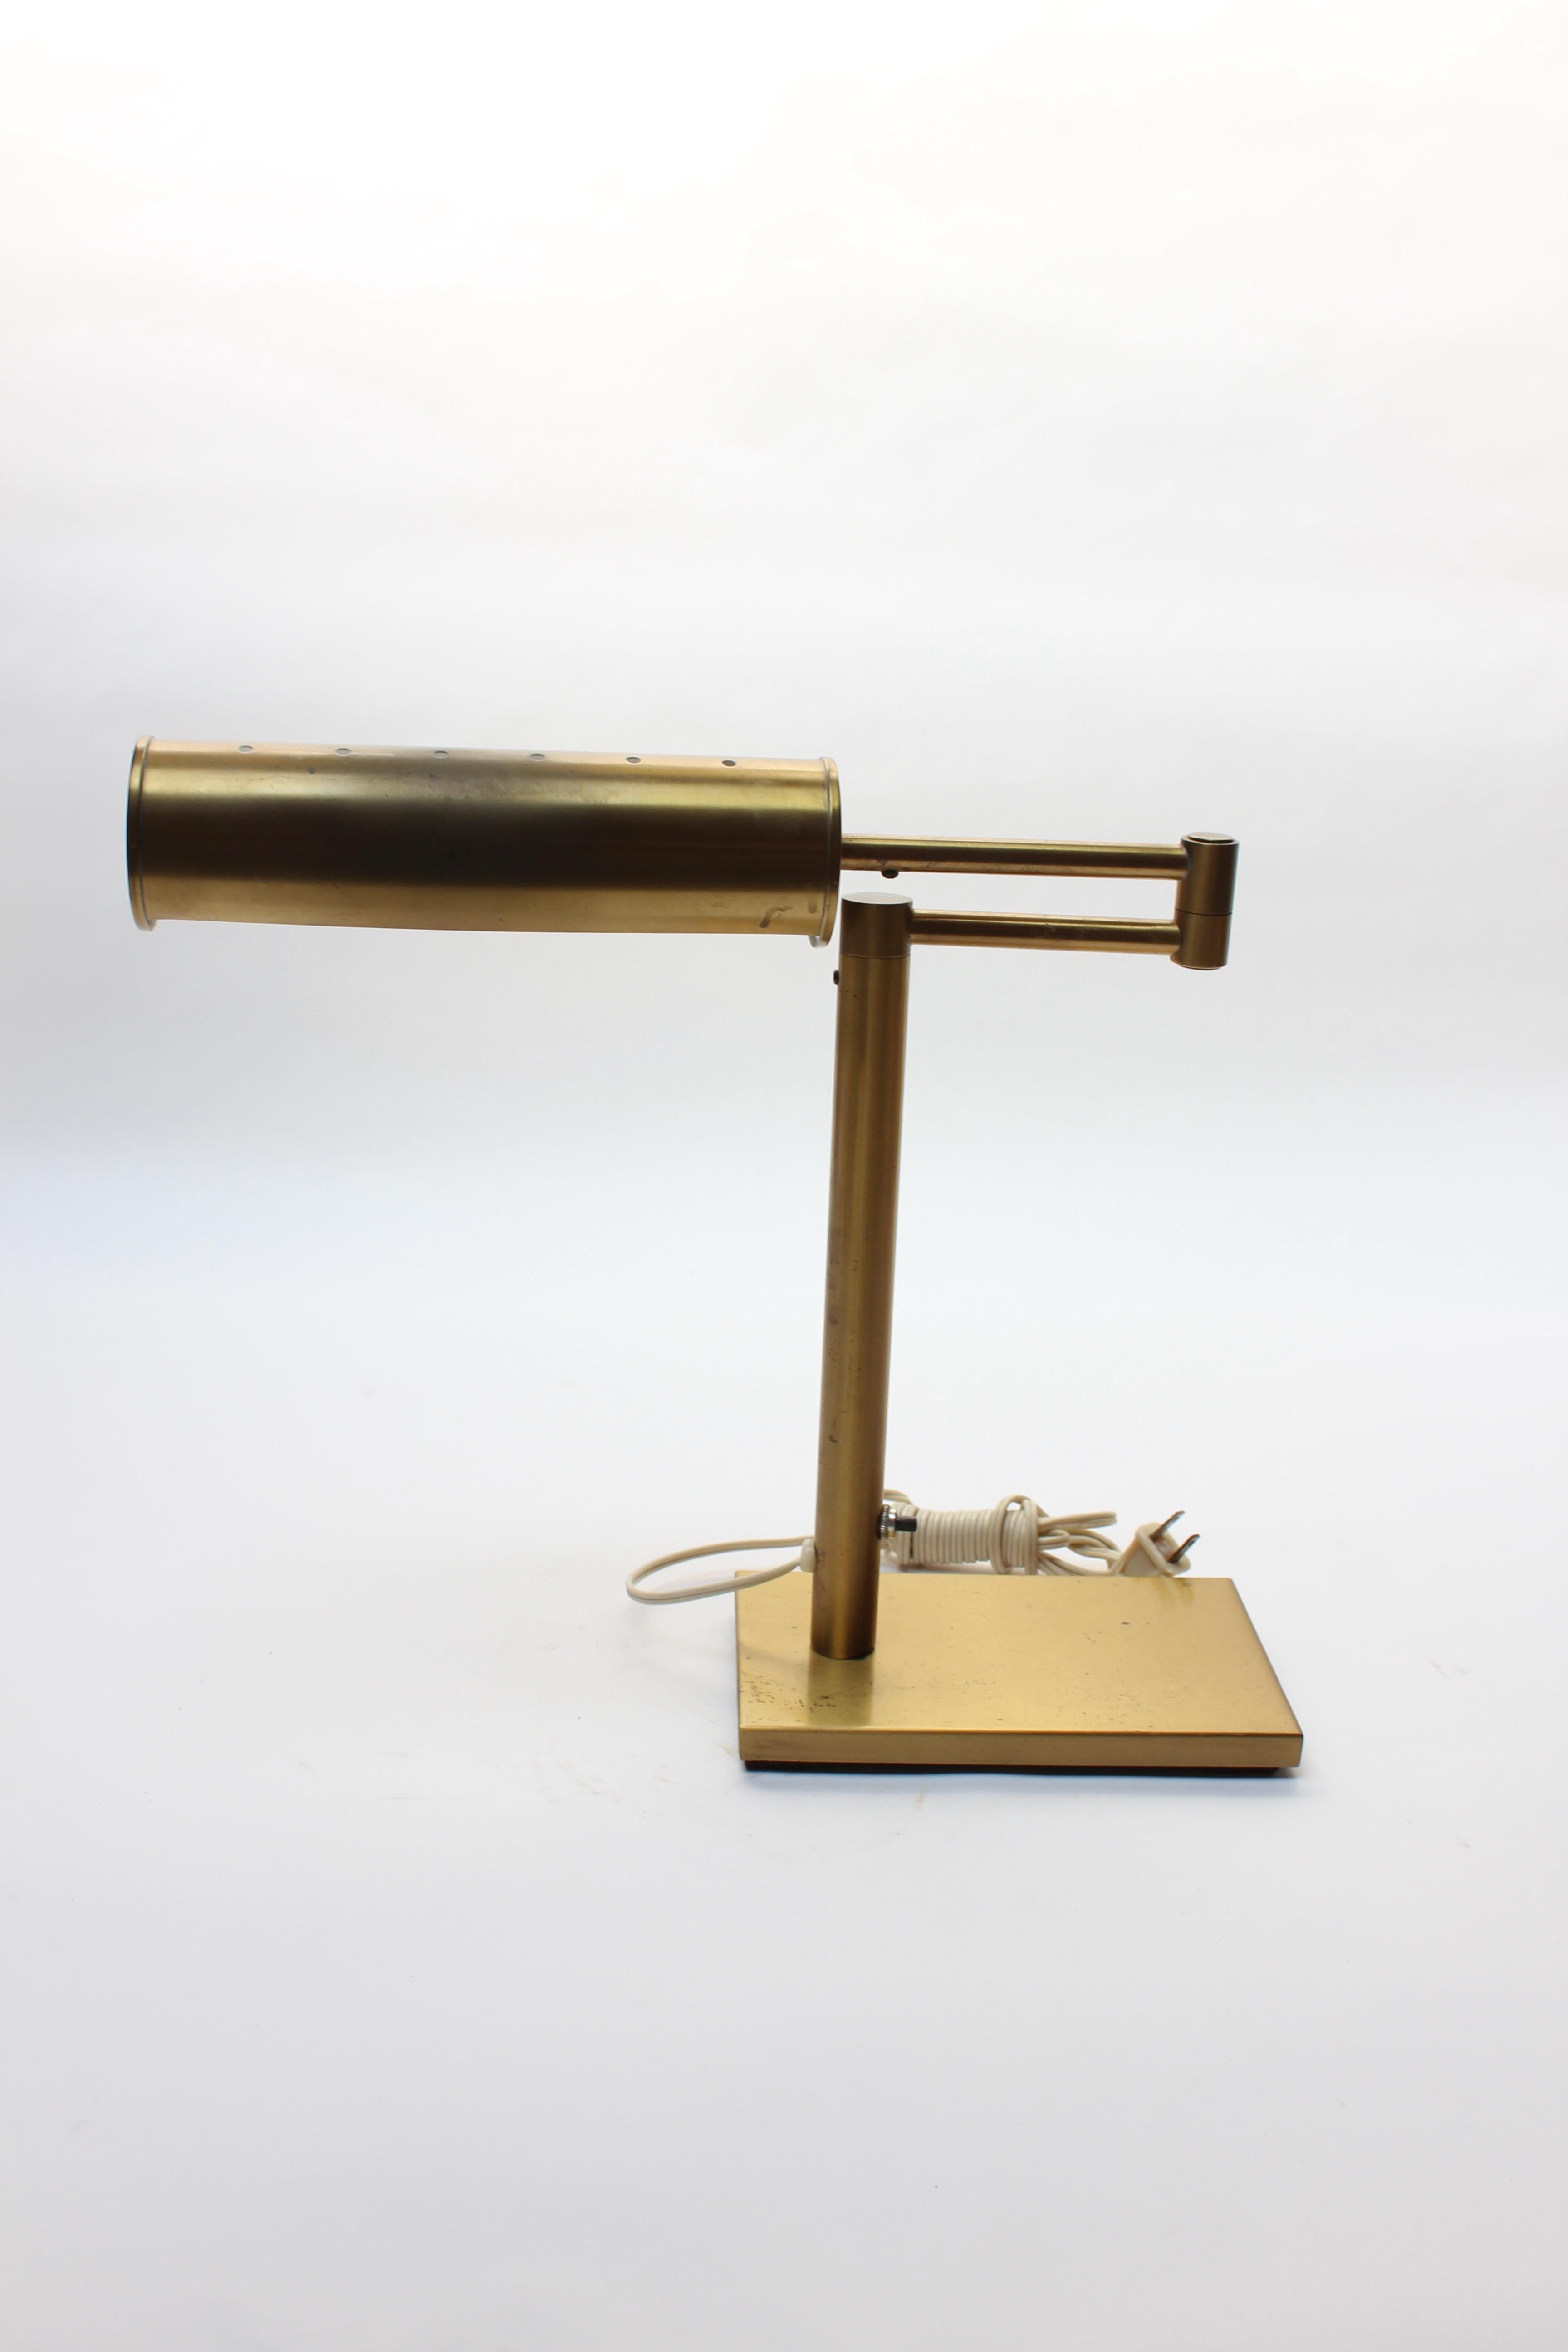 Late 20th Century Walter Von Nessen Brass Swing Arm Table Lamp with Adjustable Cylindrical Shade For Sale